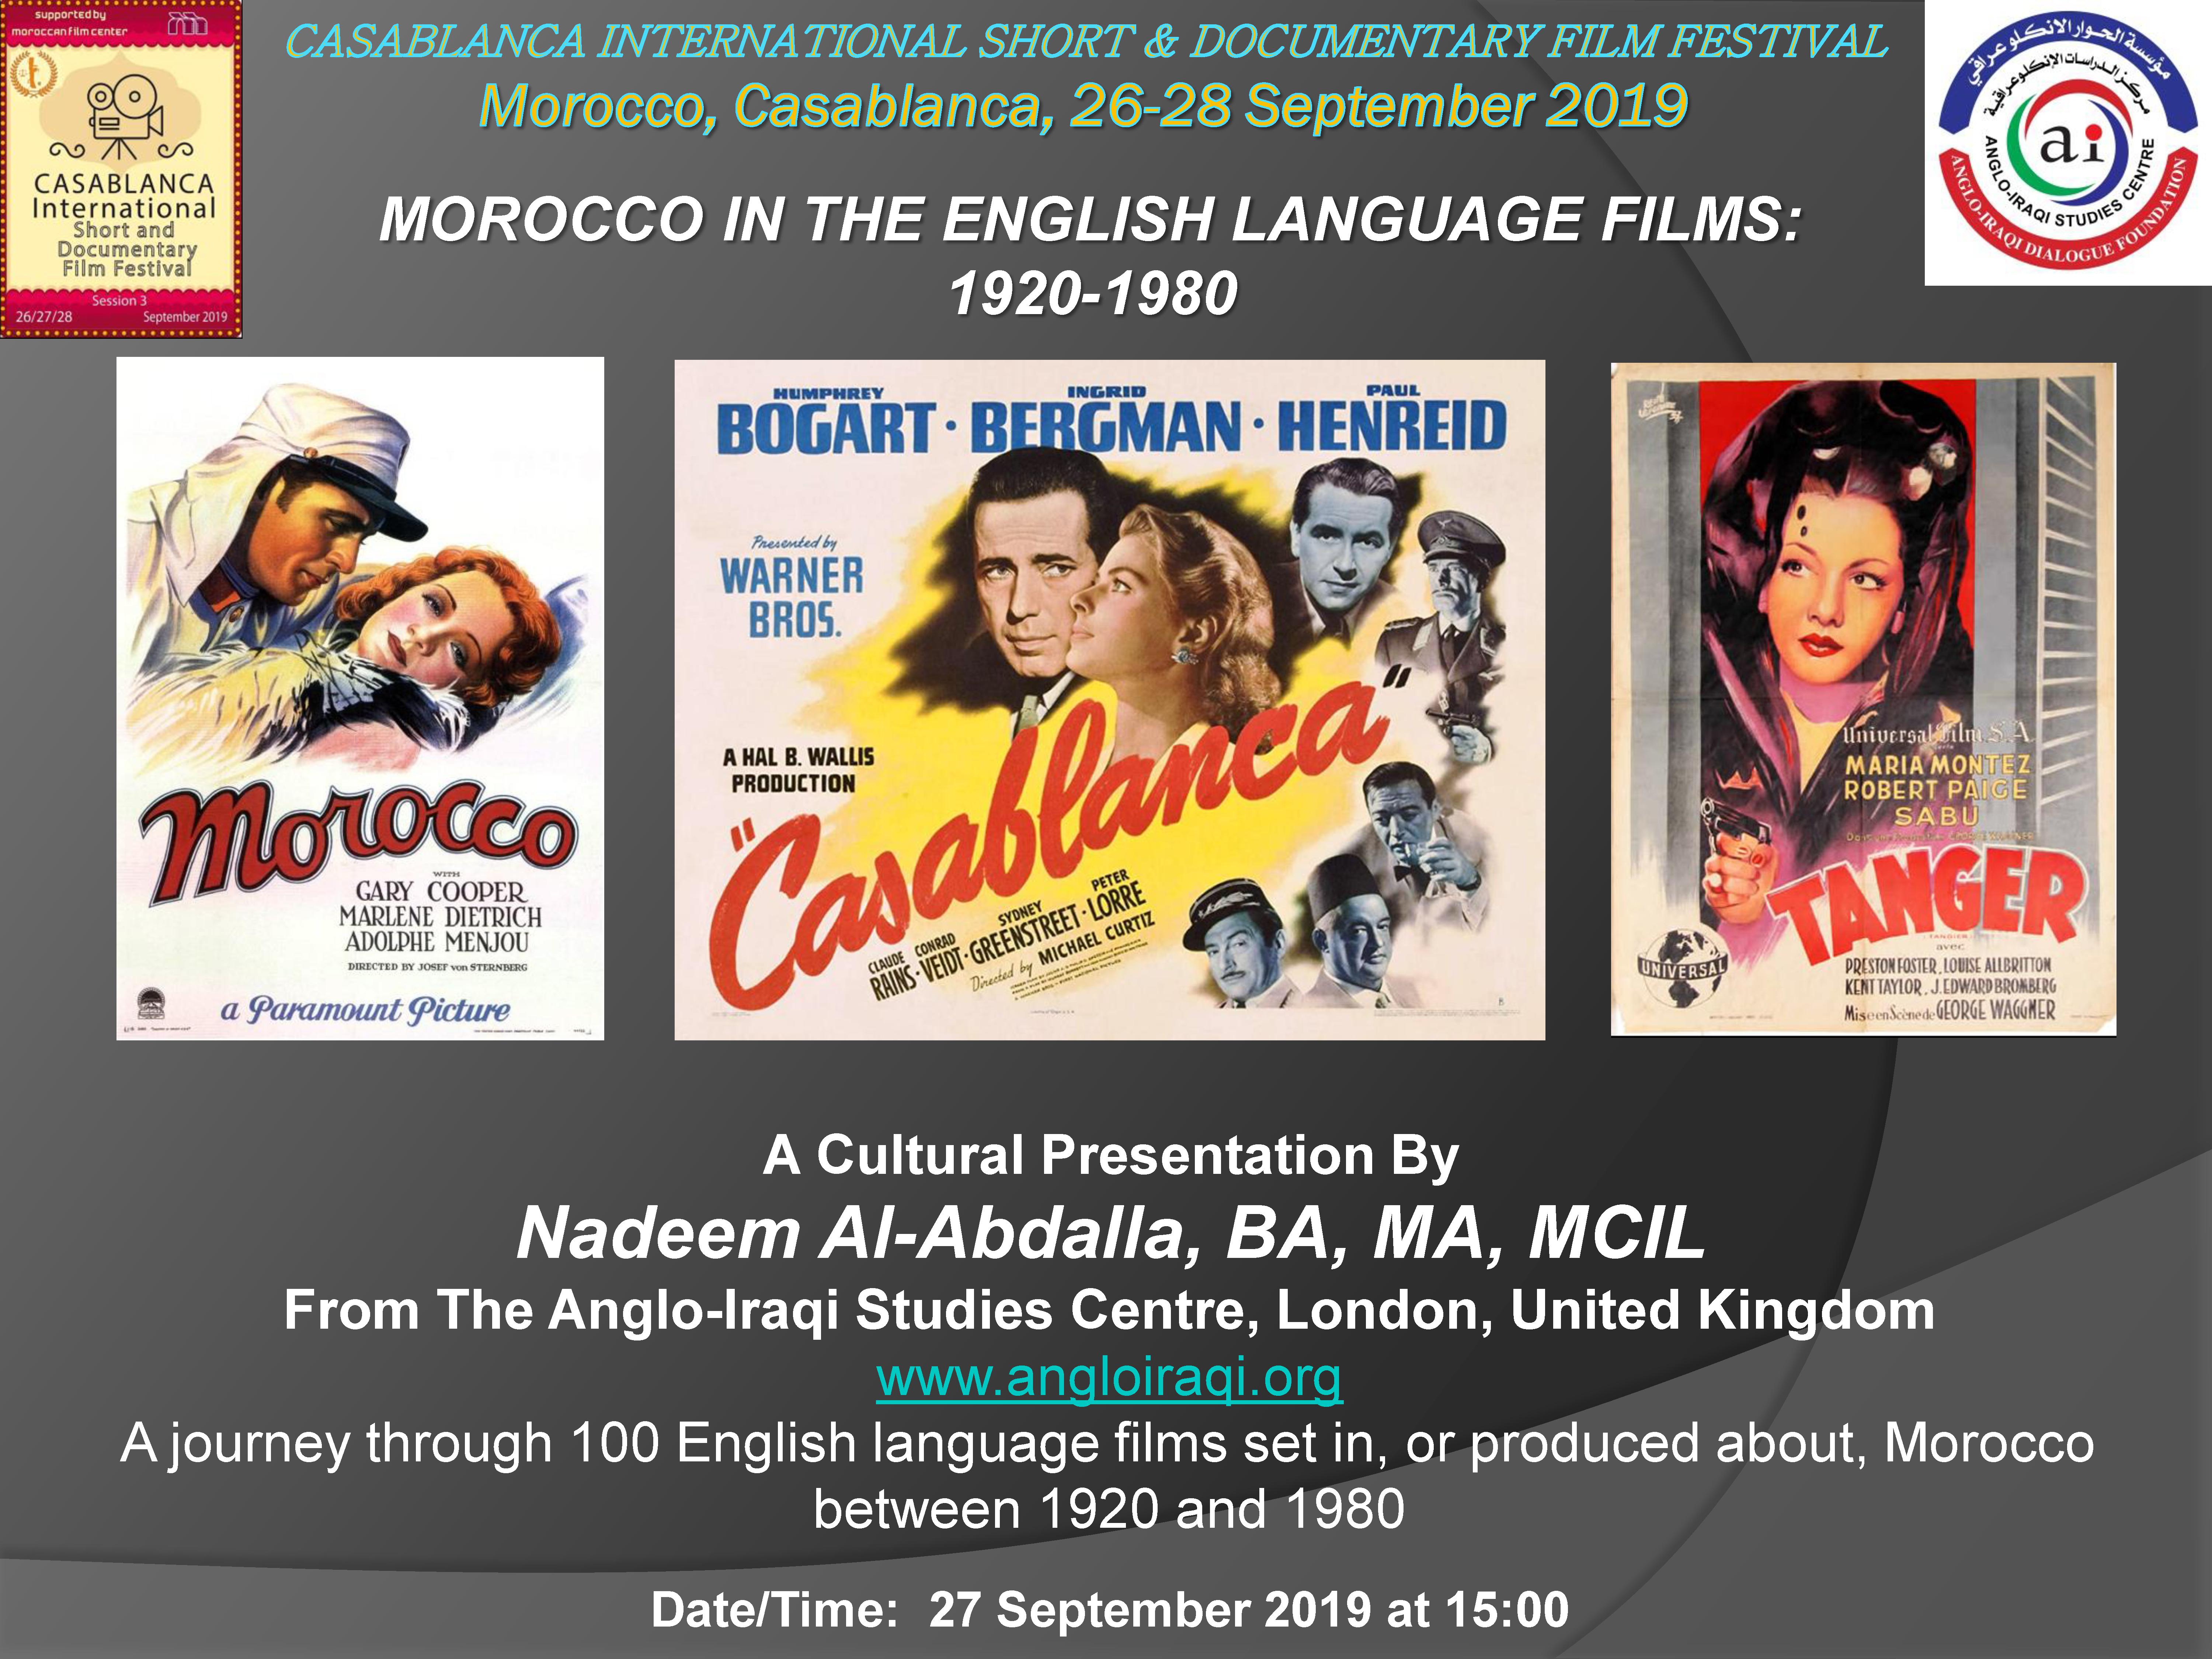 OUR NEXT CULTURAL EVENT: “Morocco In The English Language Films 1920-1980”